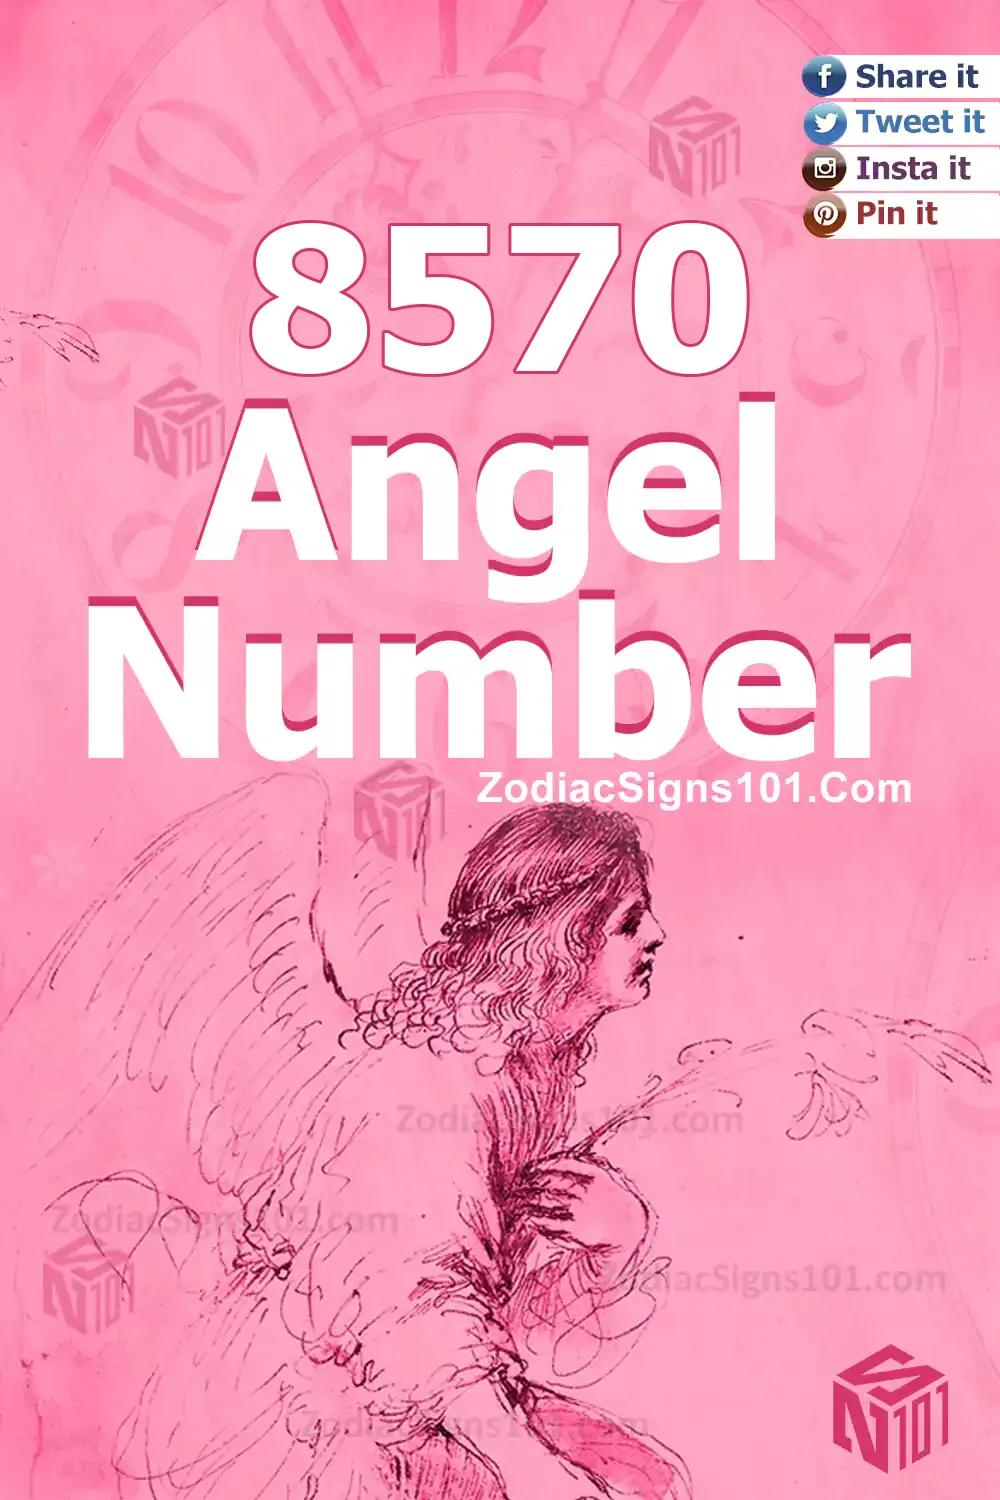 8570 Angel Number Meaning